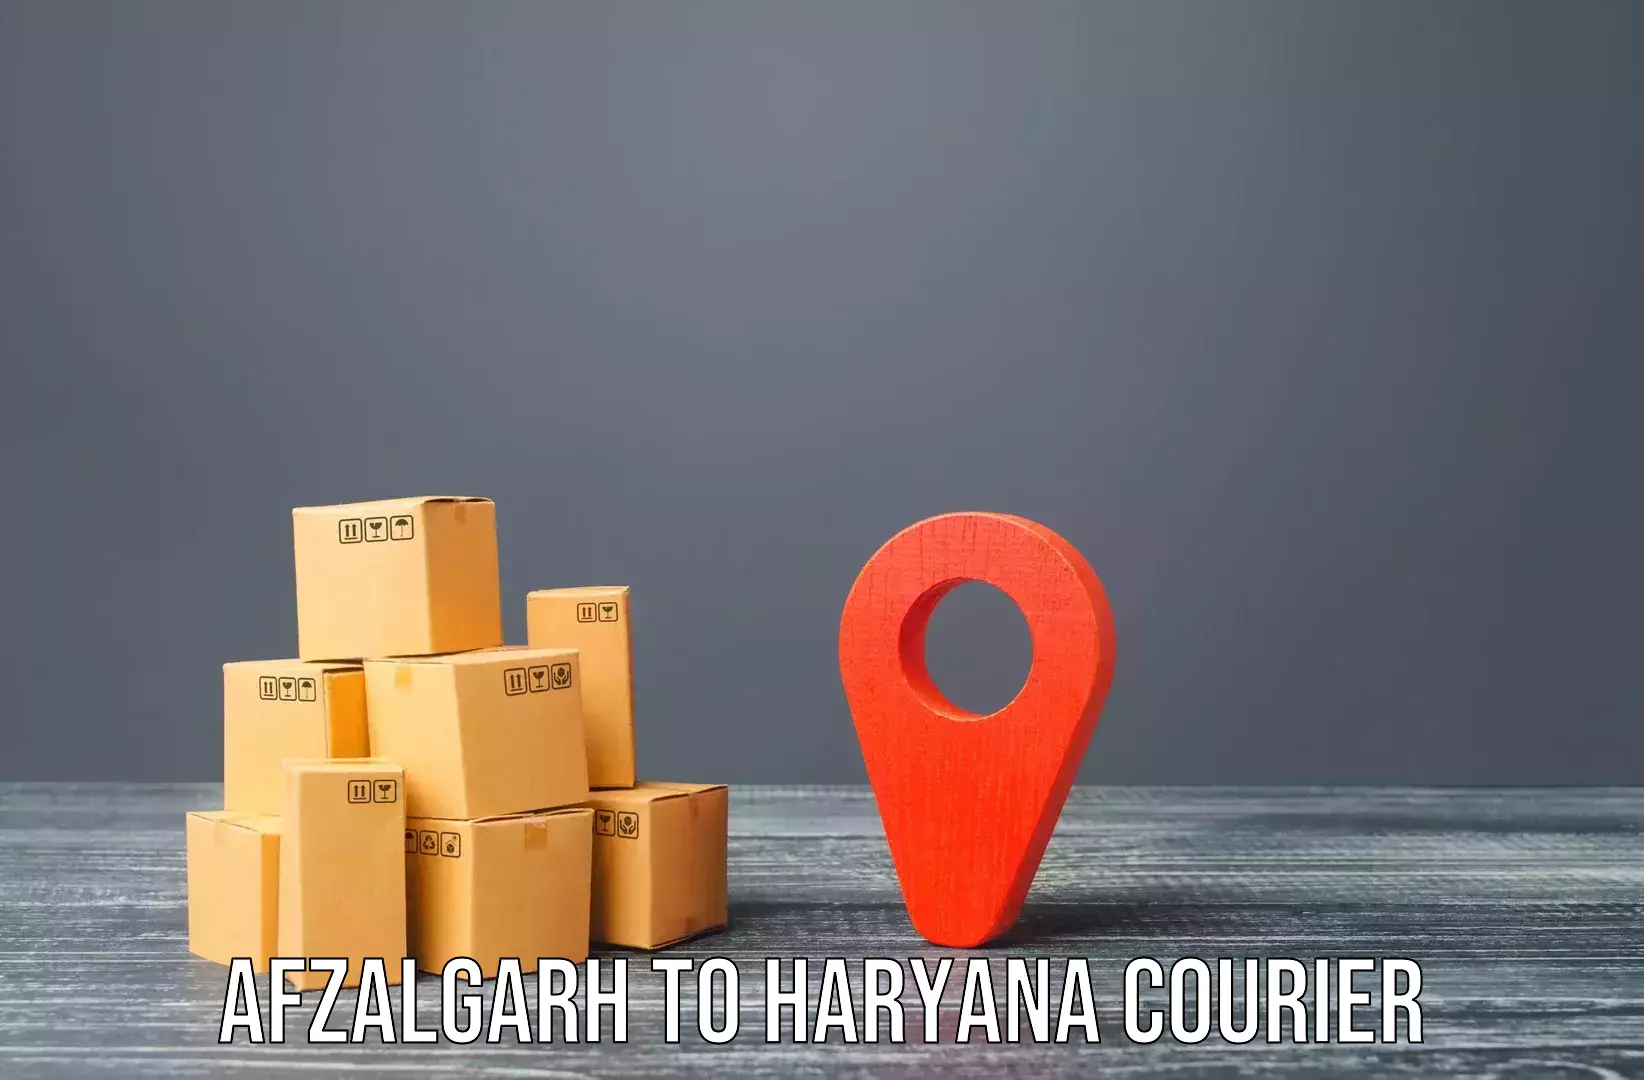 Comprehensive moving assistance Afzalgarh to Gurgaon